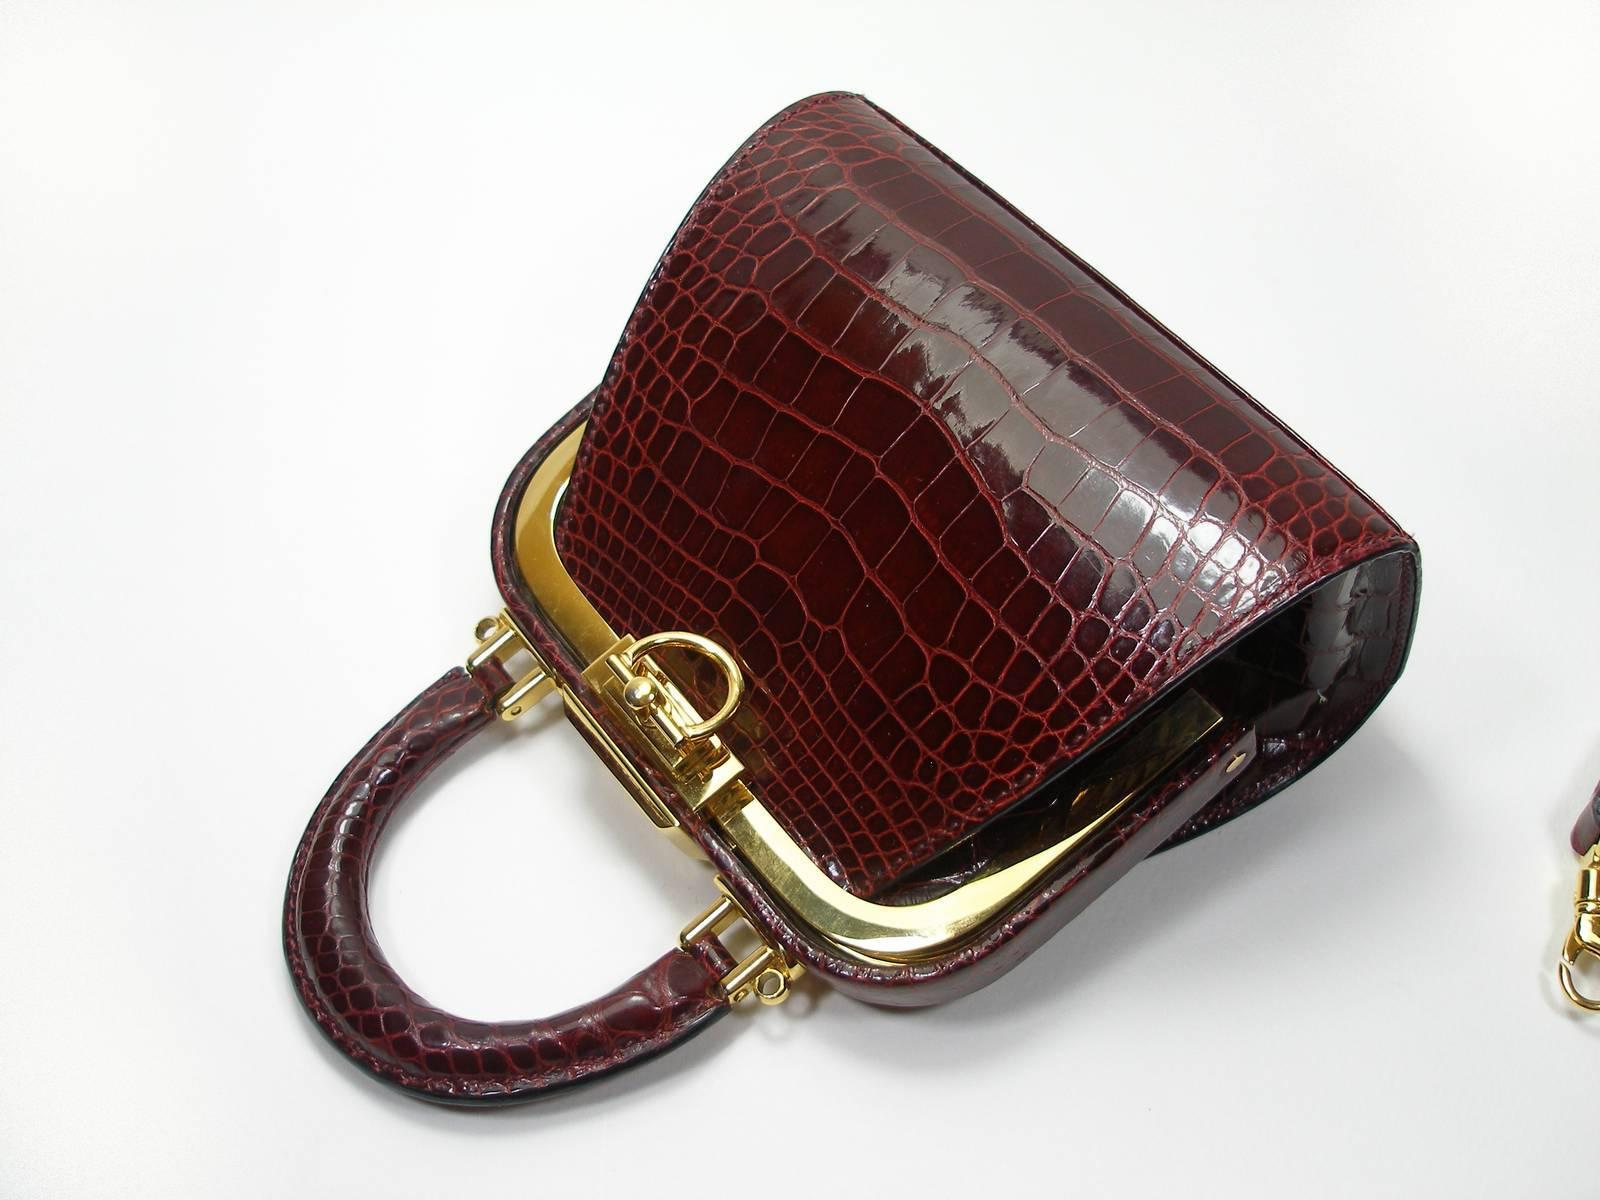 So cute Collector Pièce 
Order spécial
Rétail price estimated $ 18000
Doctor Bag Christian Dior
Alligator Leather
Color : brown / cognac / red bordeaux
MAGNIFIC
Ultra small size / Micro bag
Measurements : 5.7 